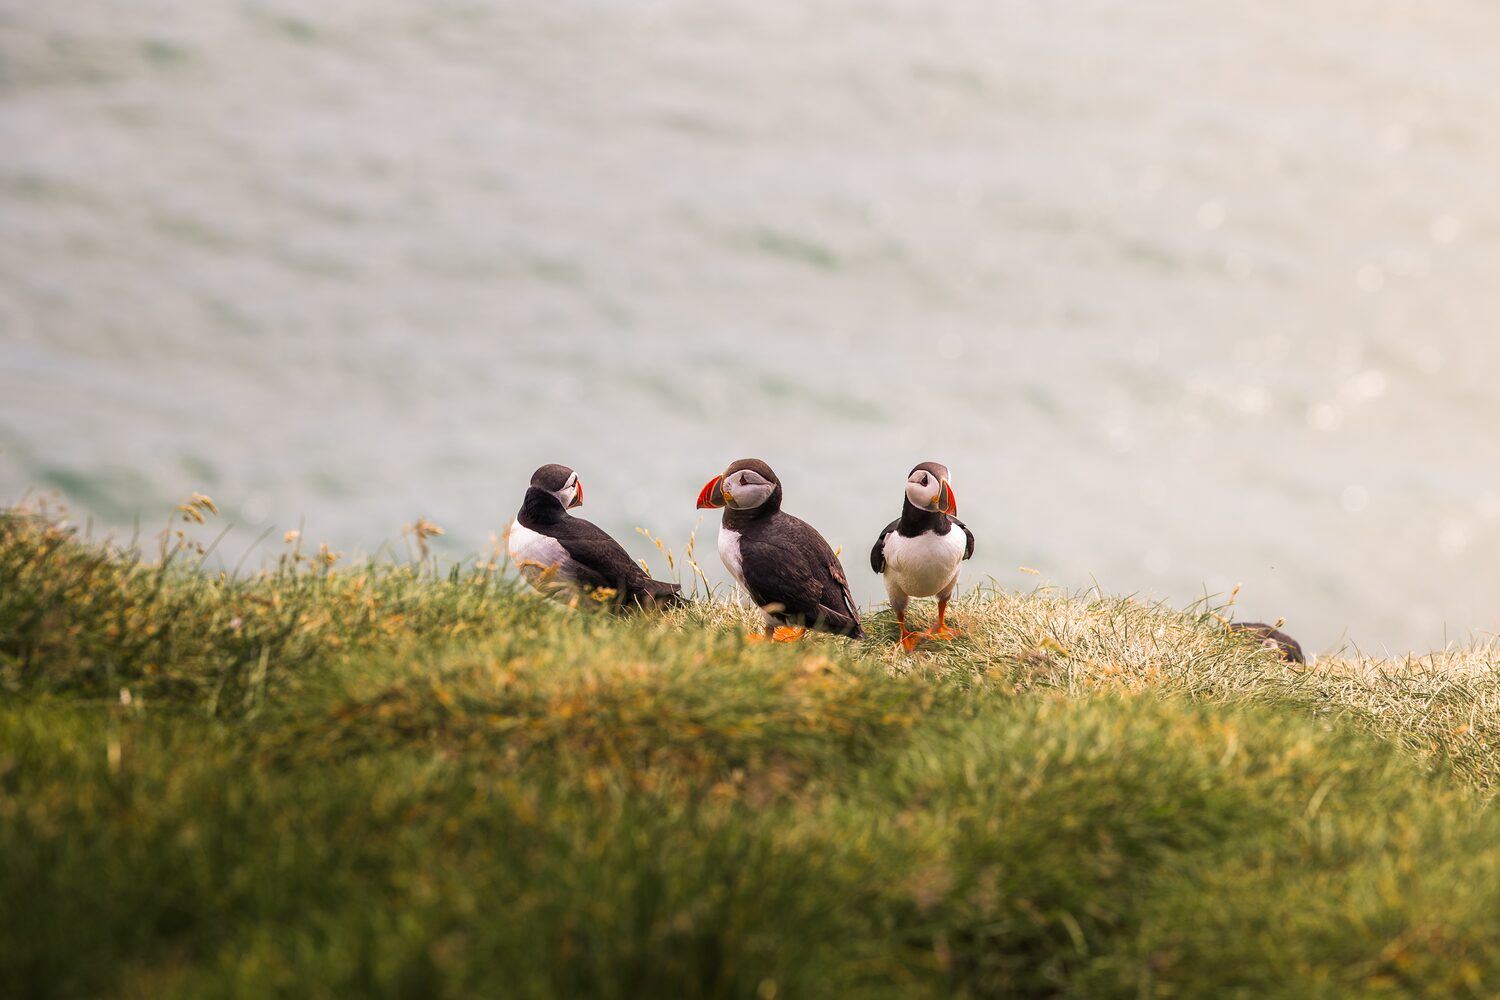 Puffins at the sea coast in Westman Islands, Iceland